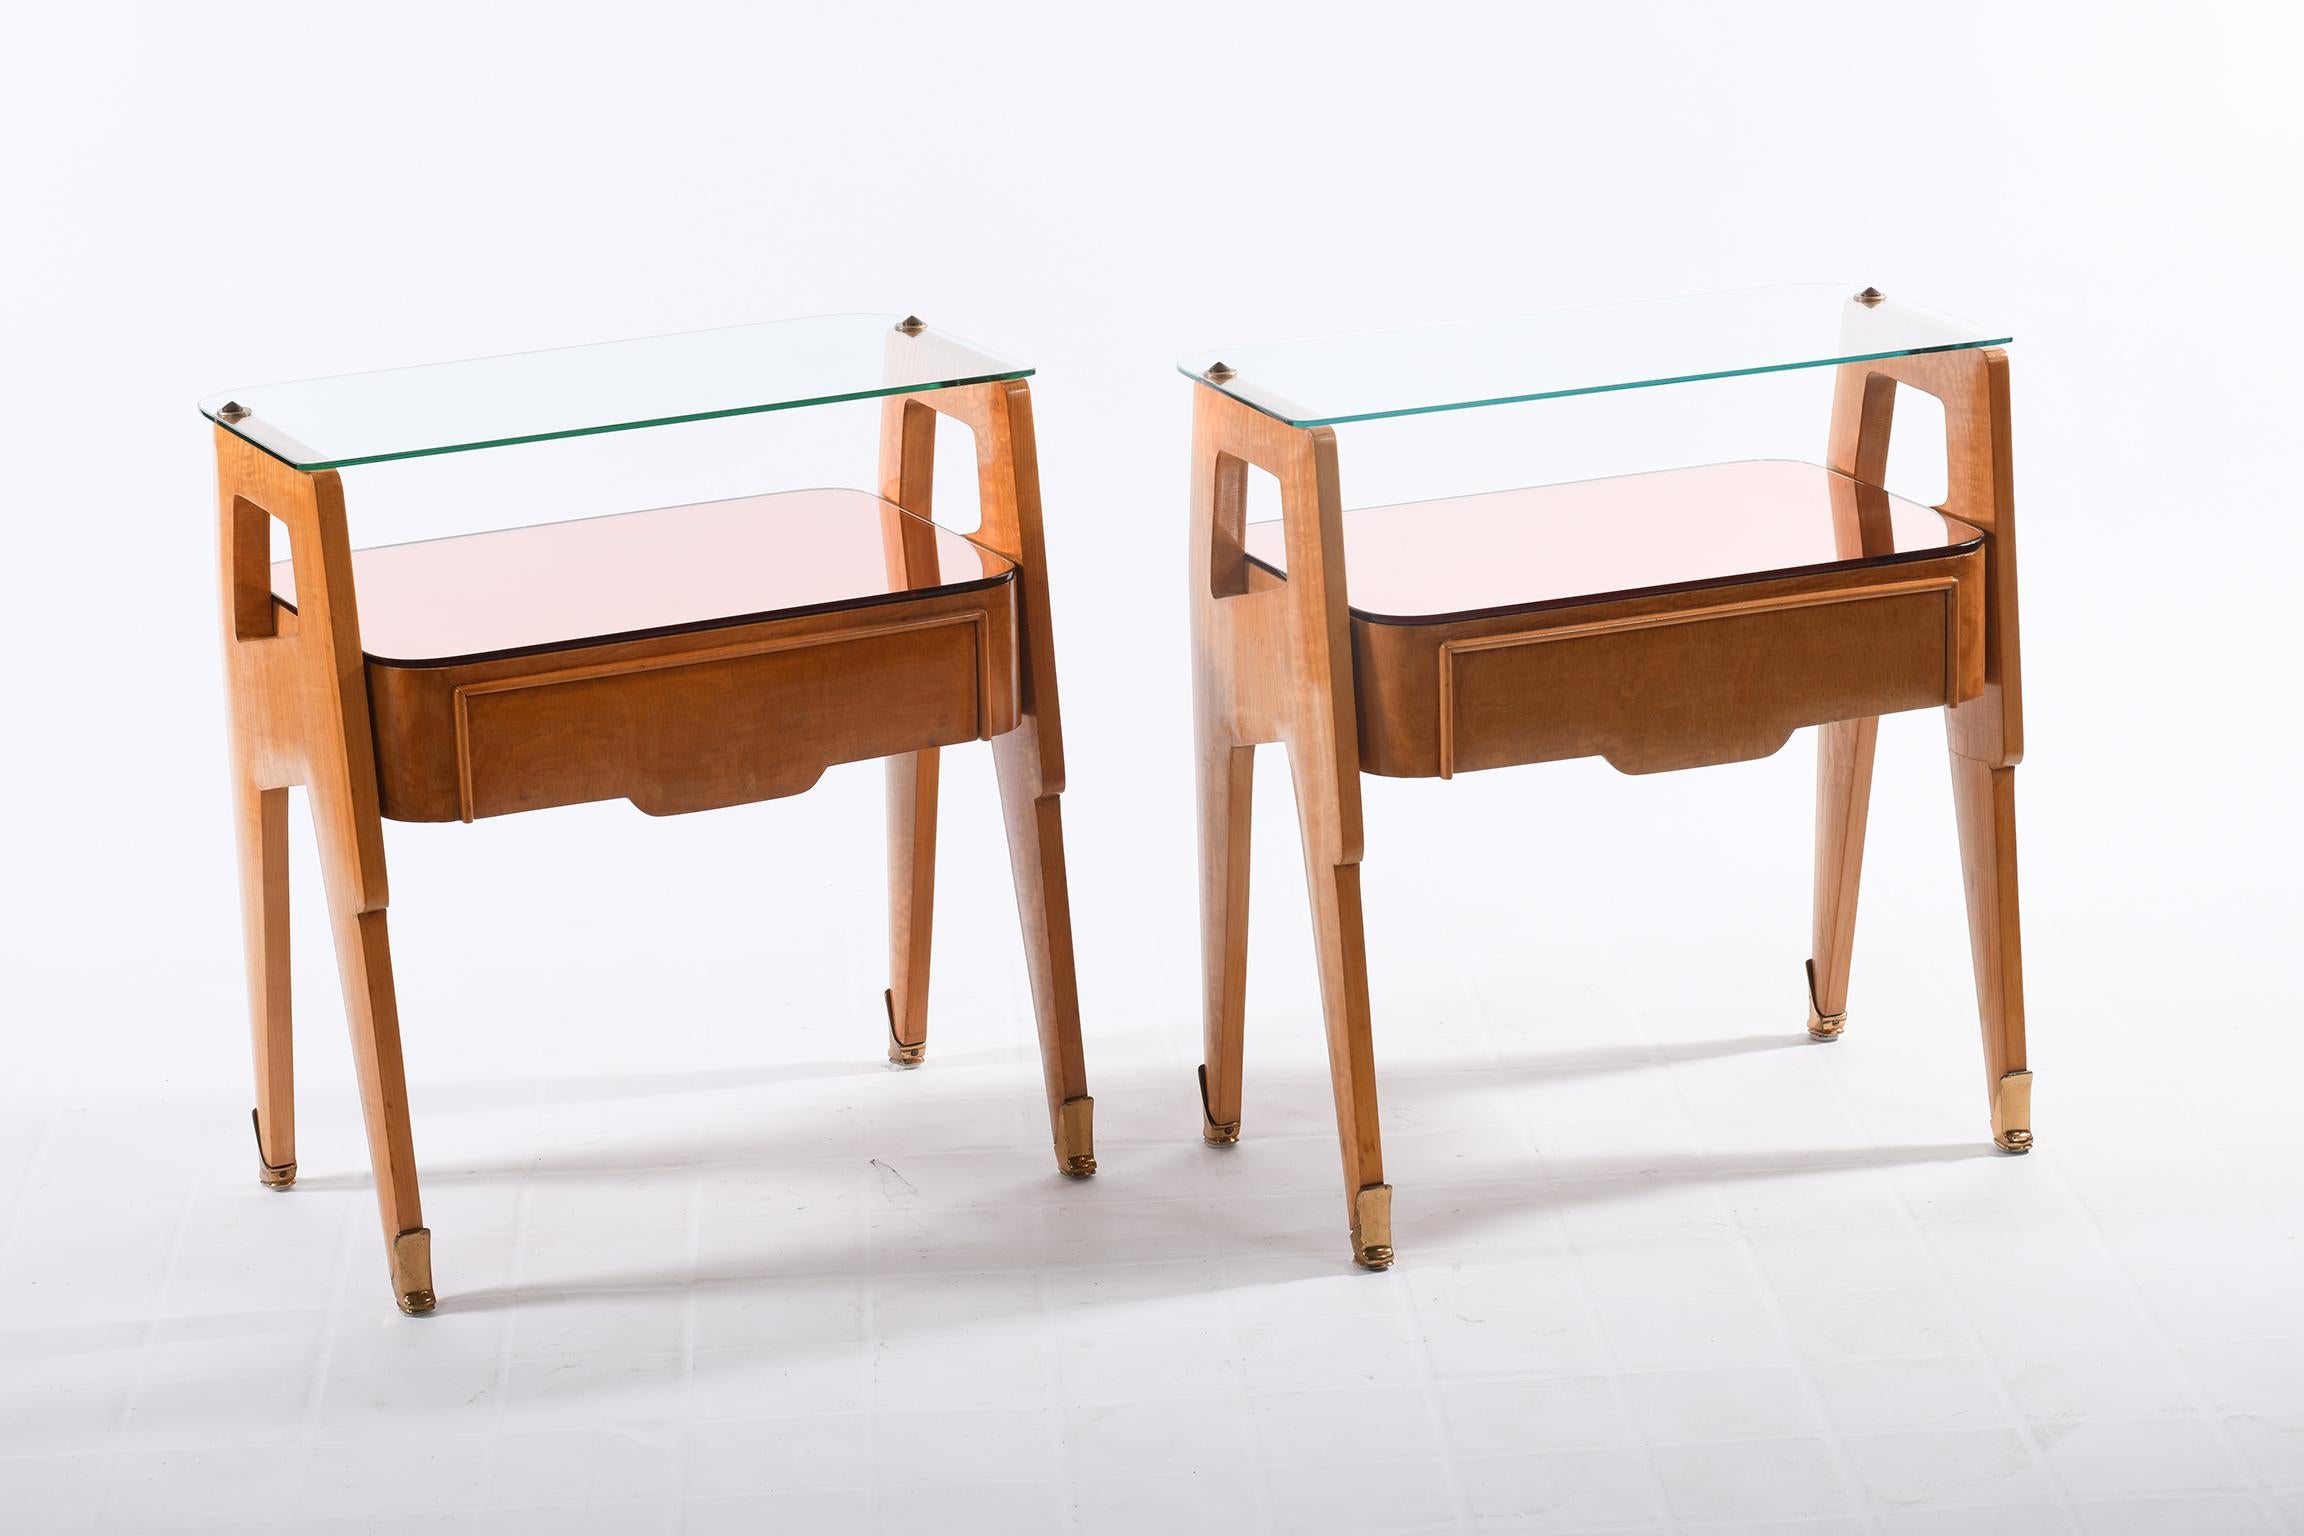 Pair of bedside tables with drawer, glass top and double lower top in copper-colored mirror.
The solid maple structure is supported by four tapered and slender legs ending with feet in cast brass, the bands and drawers are in birch.
La Permante